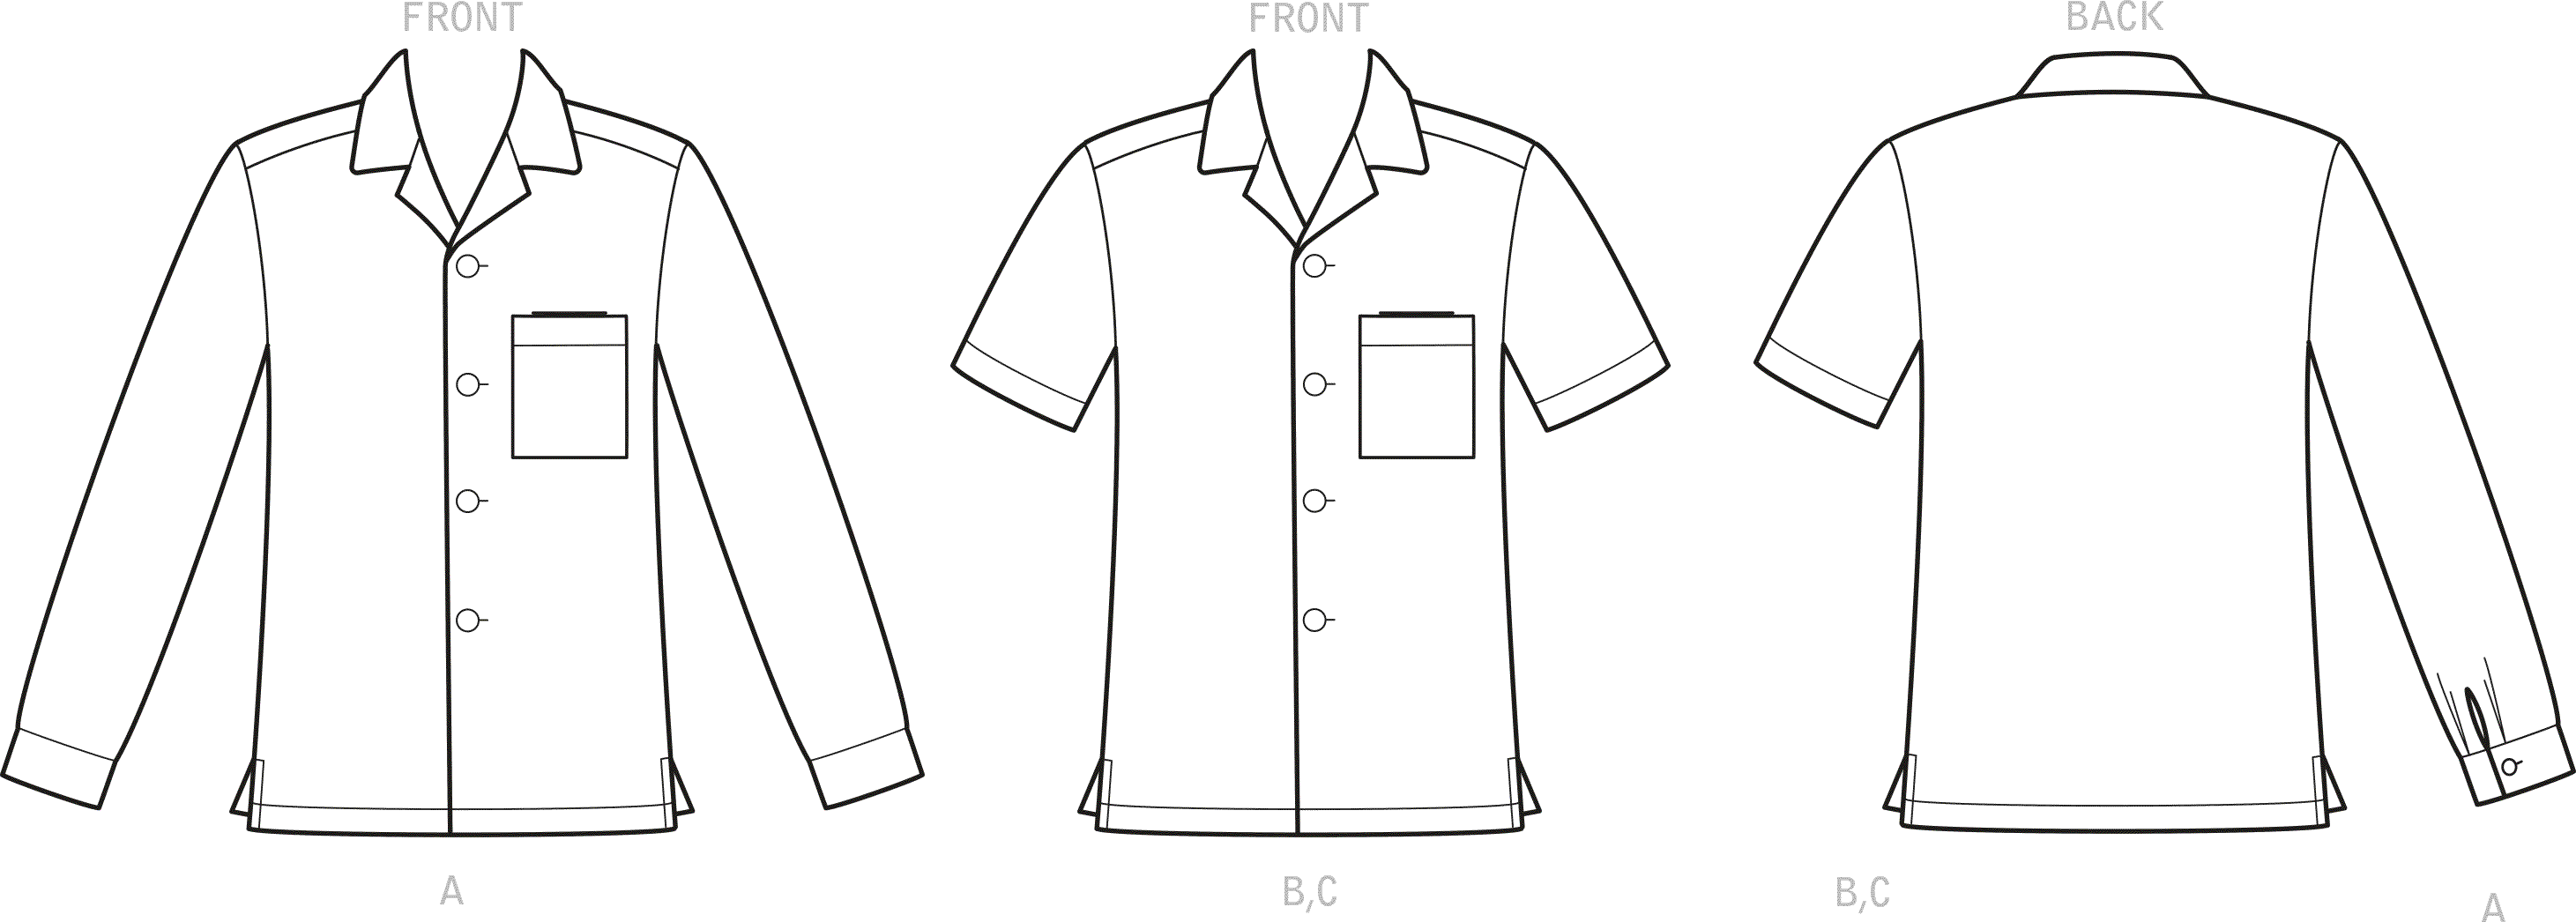 Simplicity Sewing Pattern S9157 Mens Open Pointed Collar Shirts 9157 Line Art From Patternsandplains.com